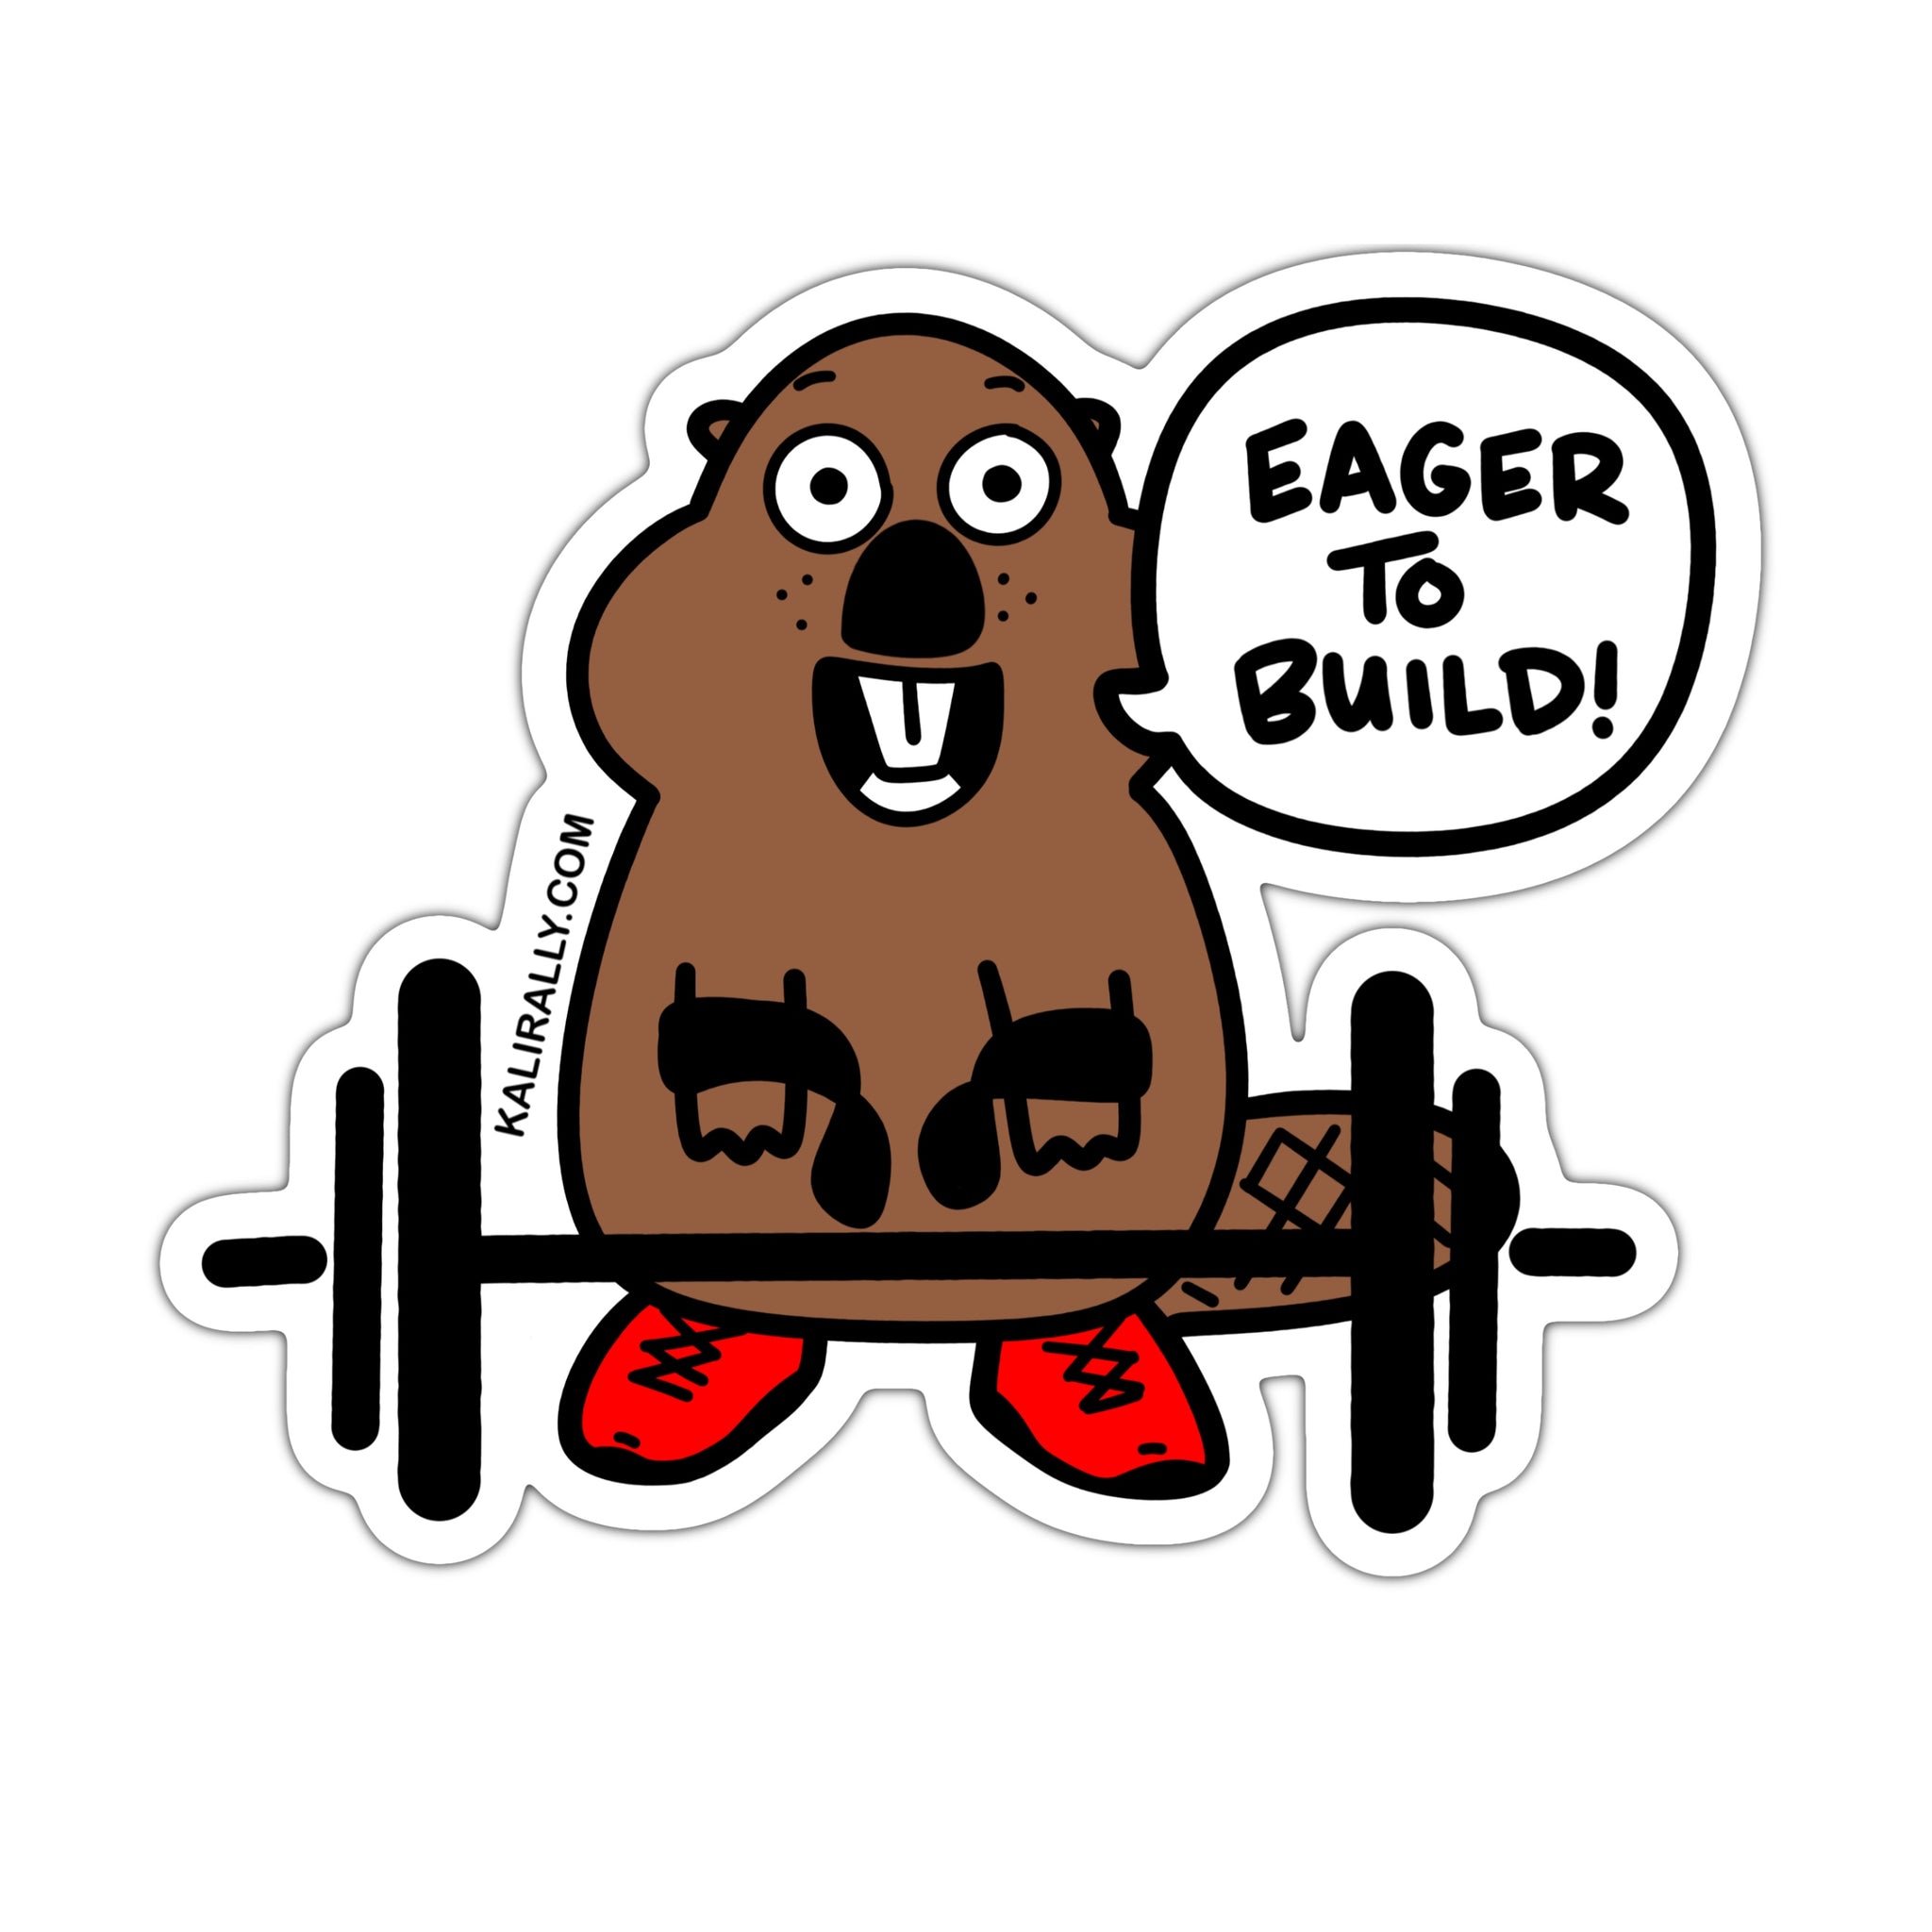 Funny weightlifting sticker, eager beaver to lift, bodybuilding decal, waterproof sticker